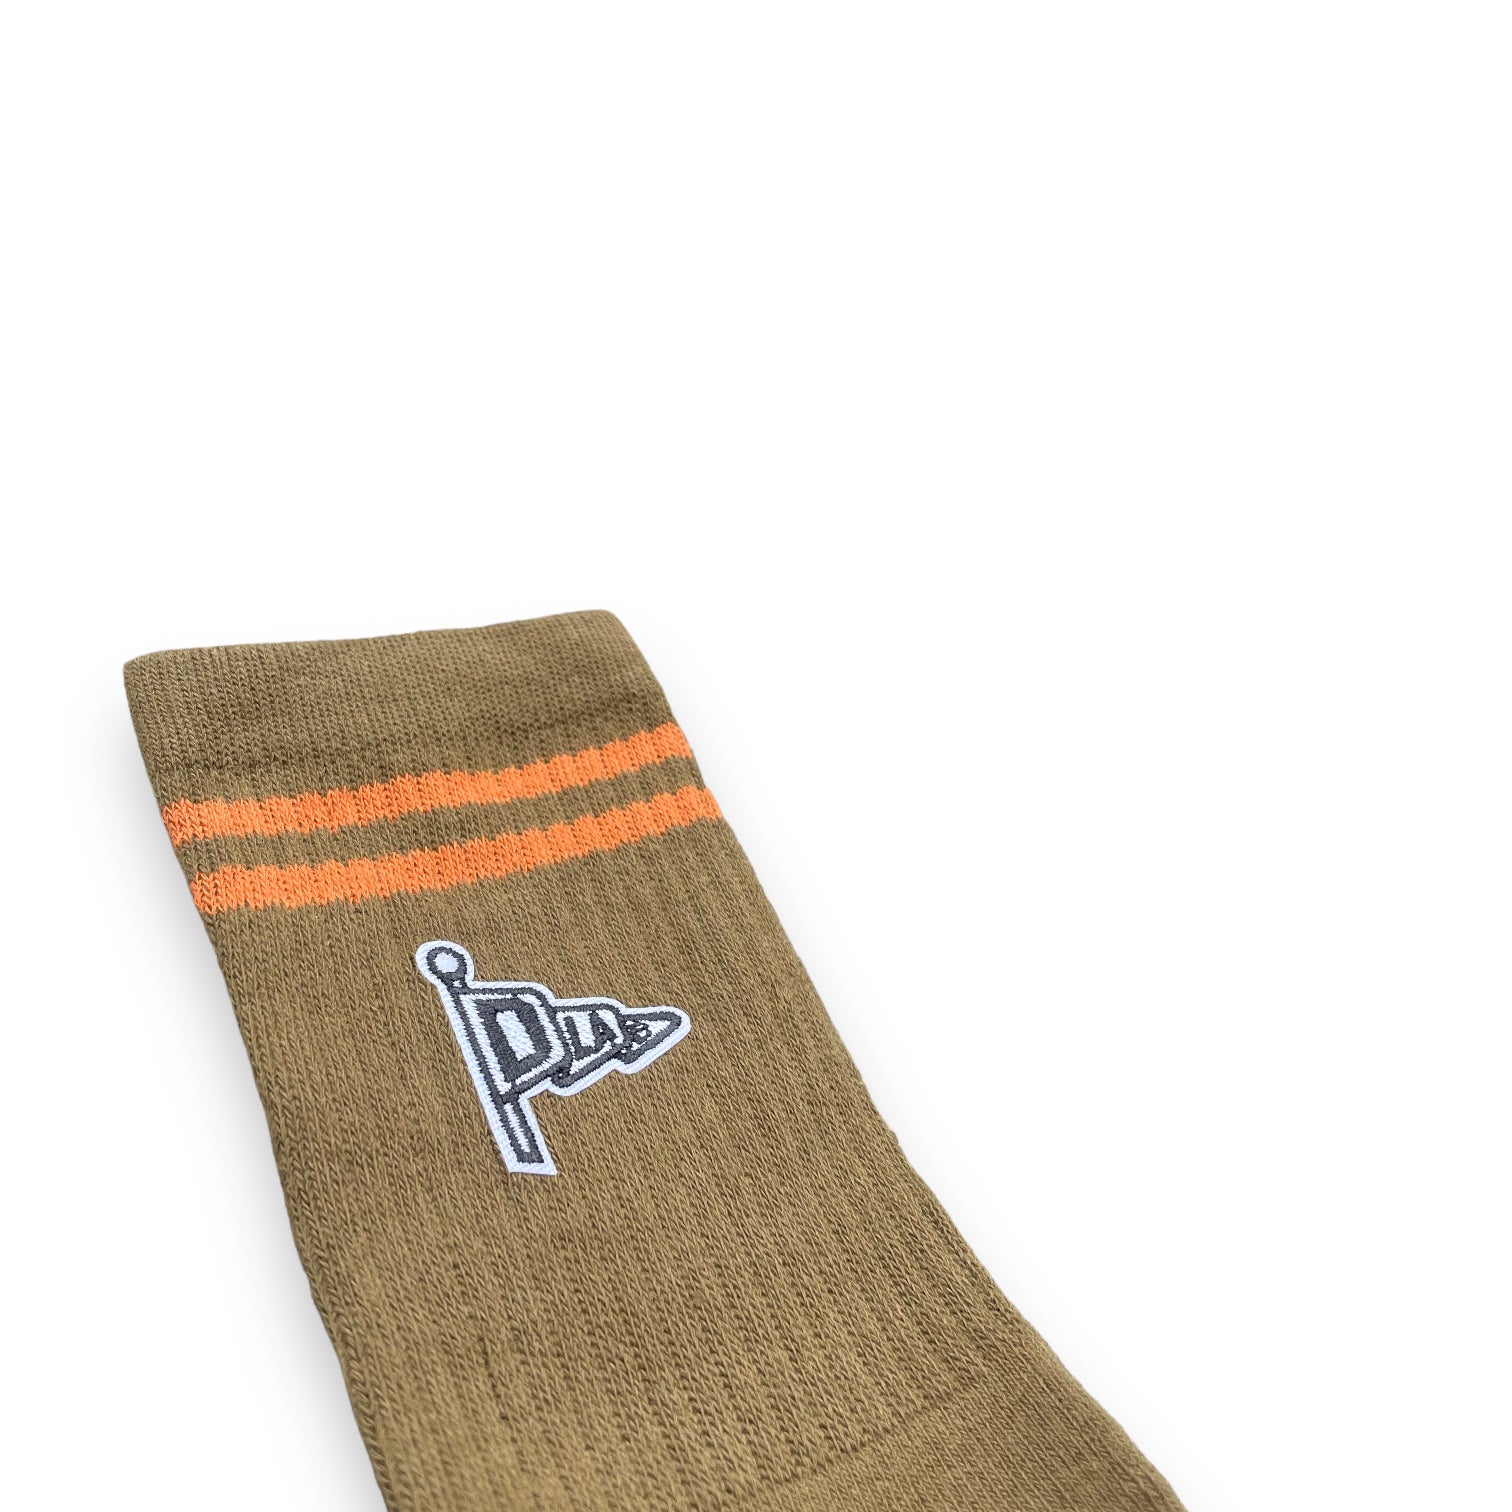 Dlab Socks (High) Green/Orange Lines with Embroidered Patch Color Logo